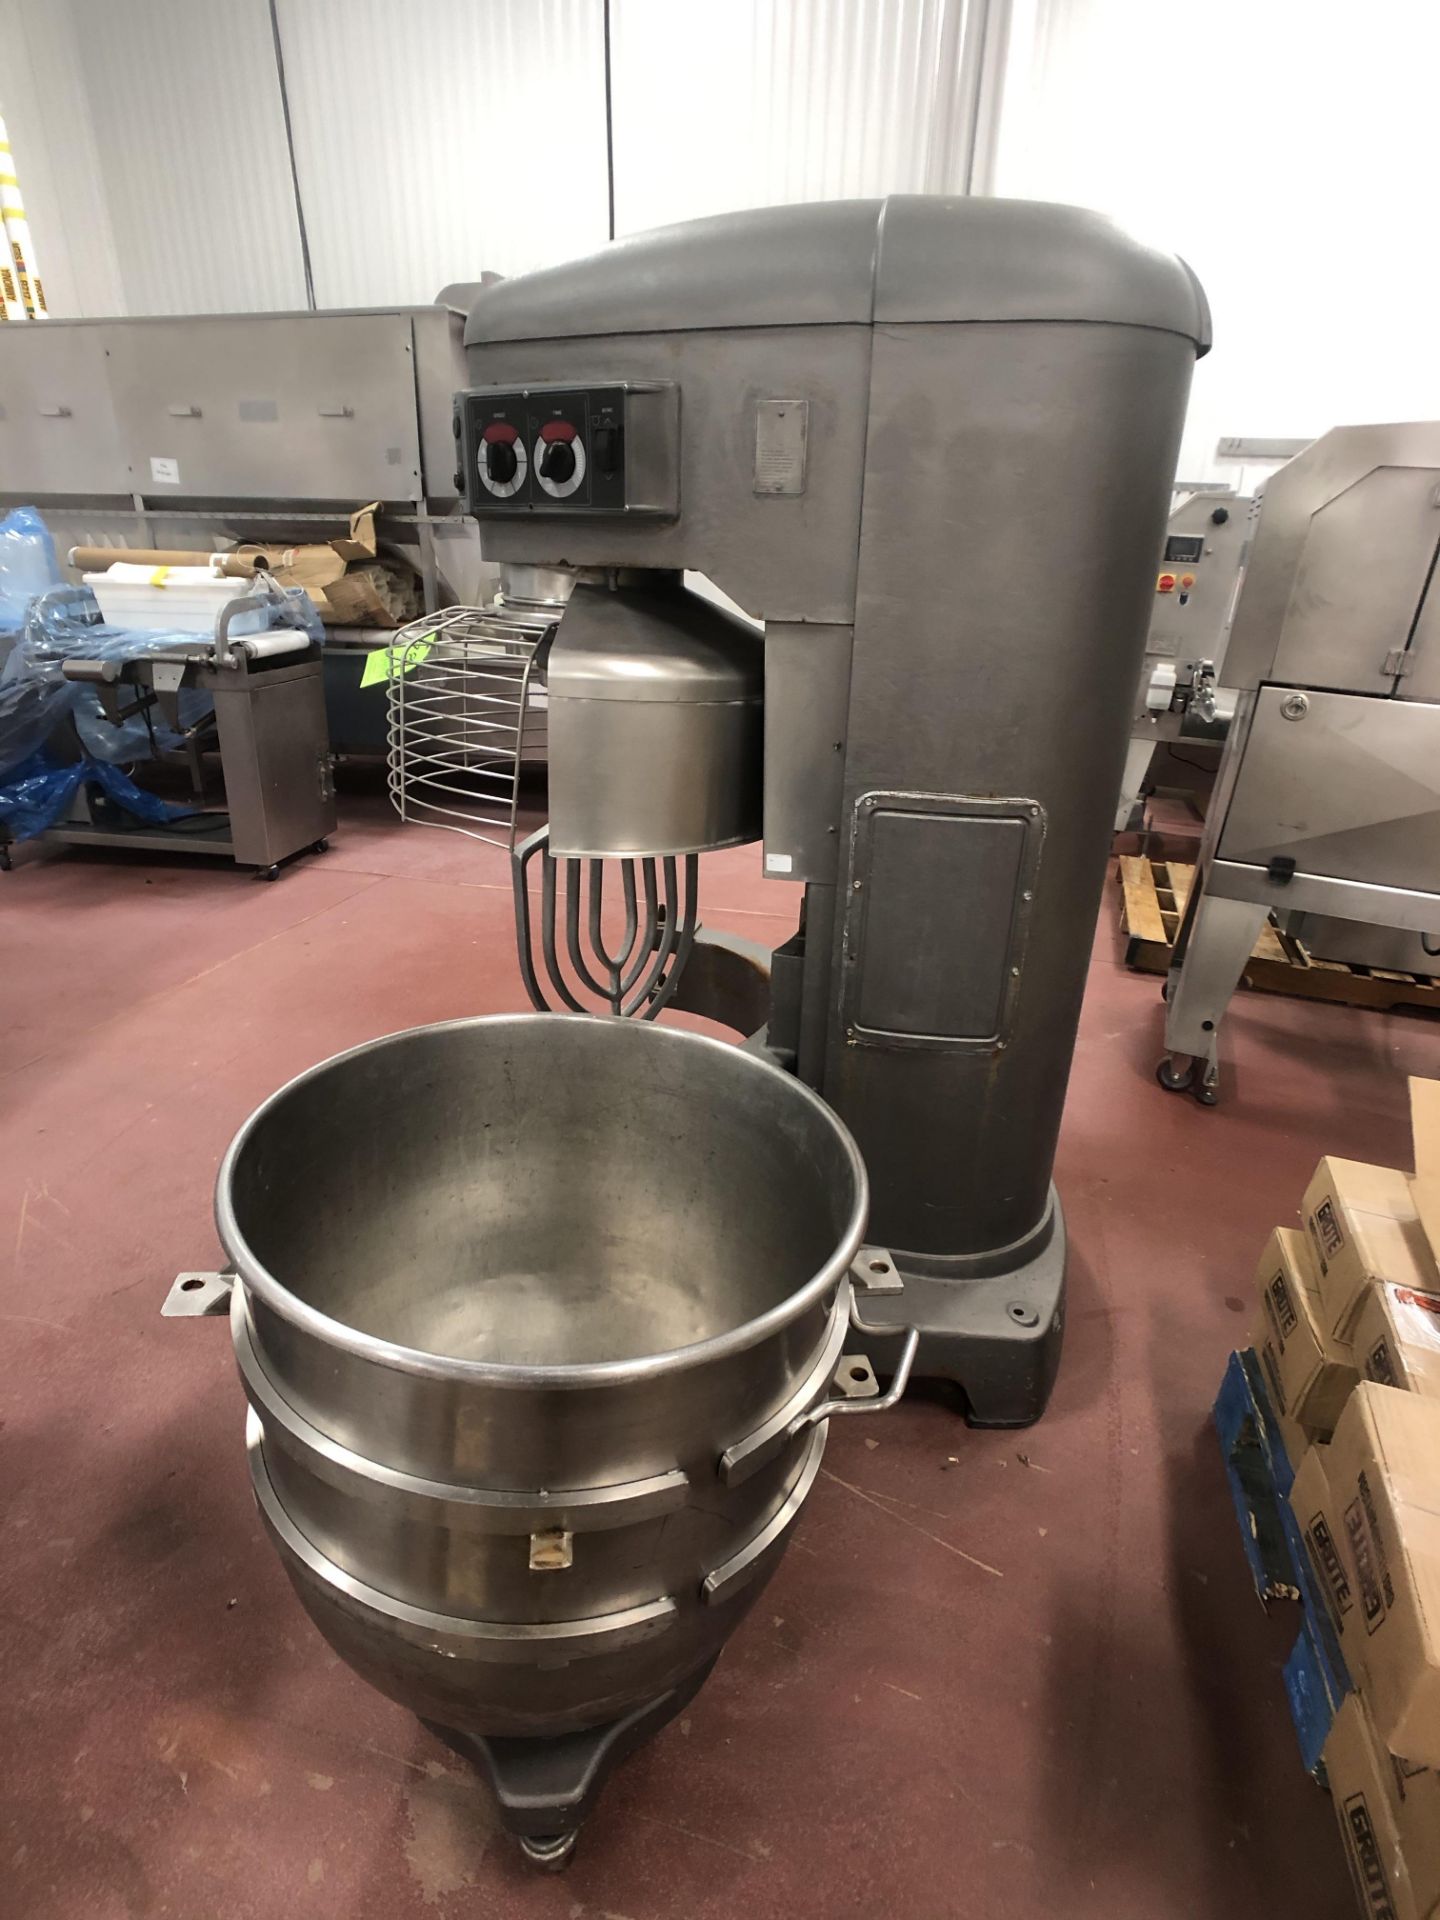 HOBART MIXER MODEL HL 1400, S/N 31-1522 206, INCLUDES BOWL 140 QT AND BEATER ATTACHMENTS - Image 5 of 6